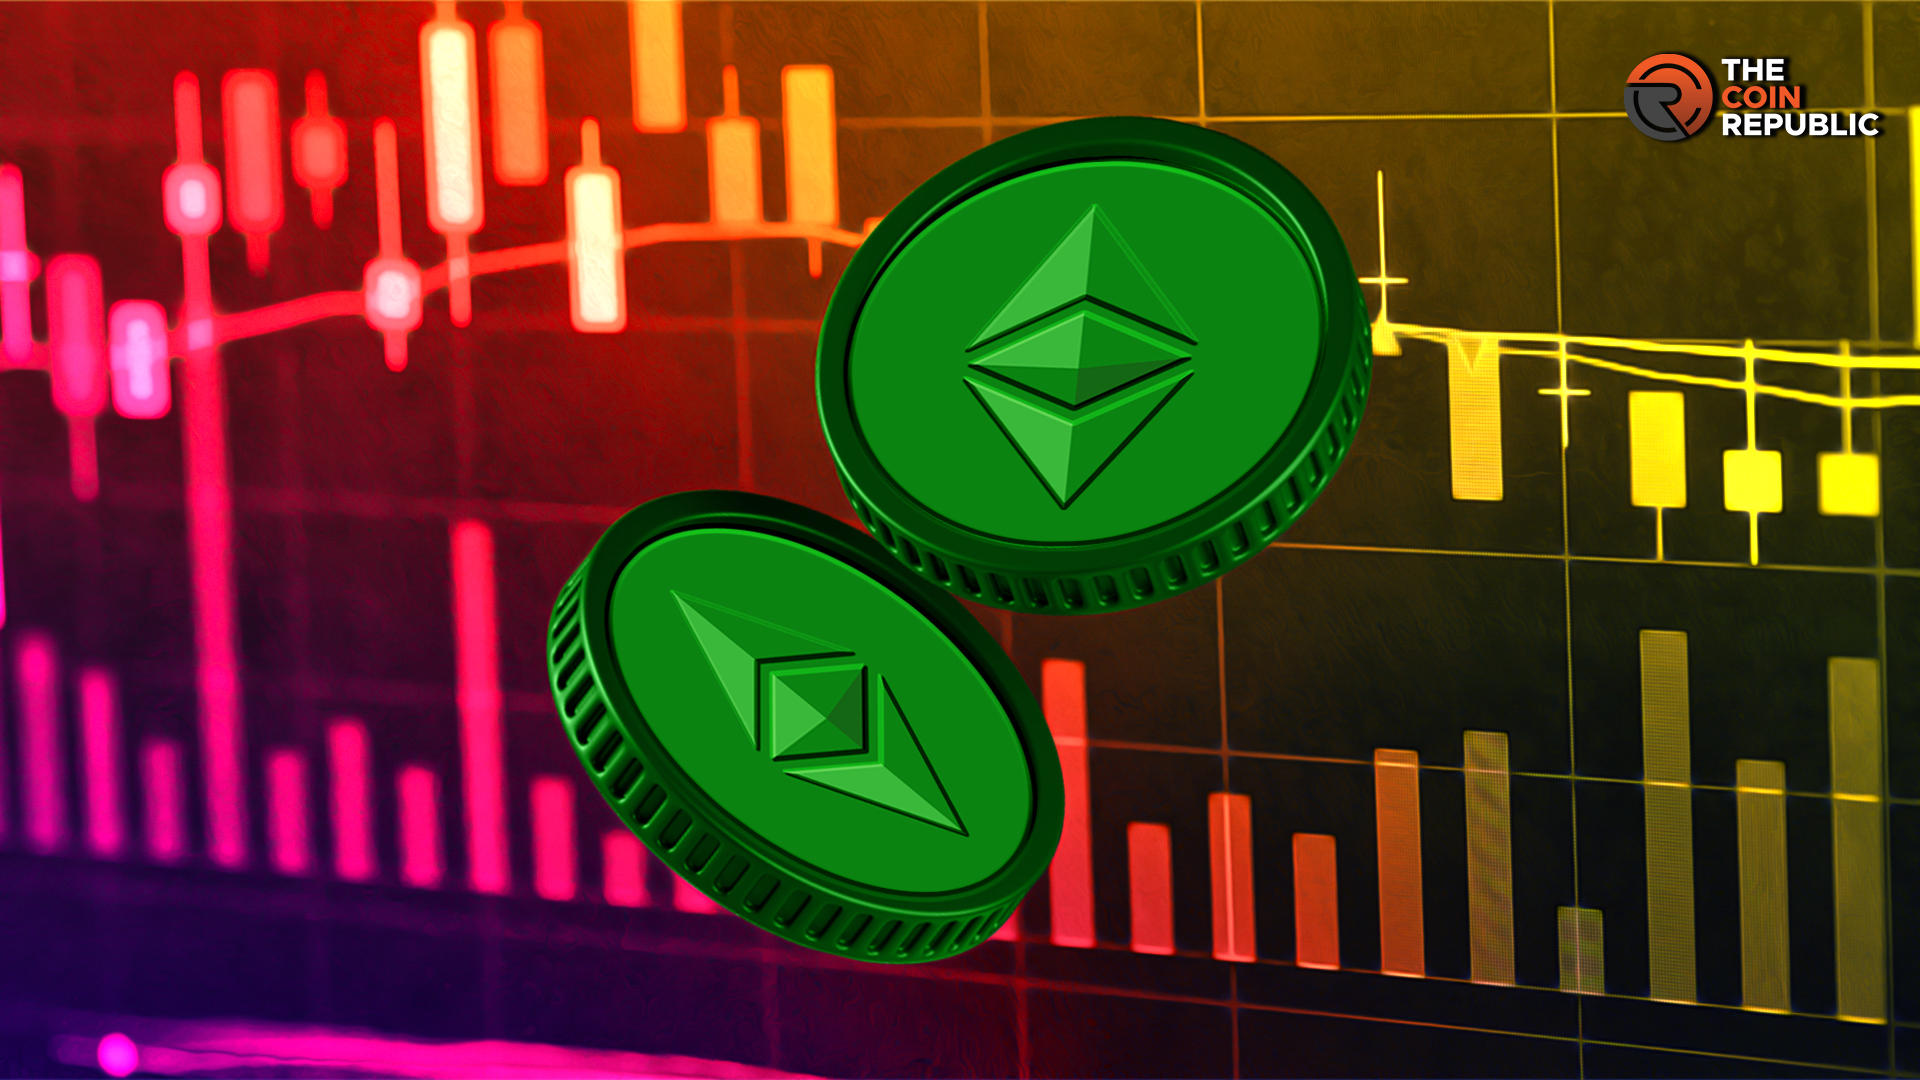 Can Ethereum Classic Crypto Retest Supply Zone & Reach $30 Mark?